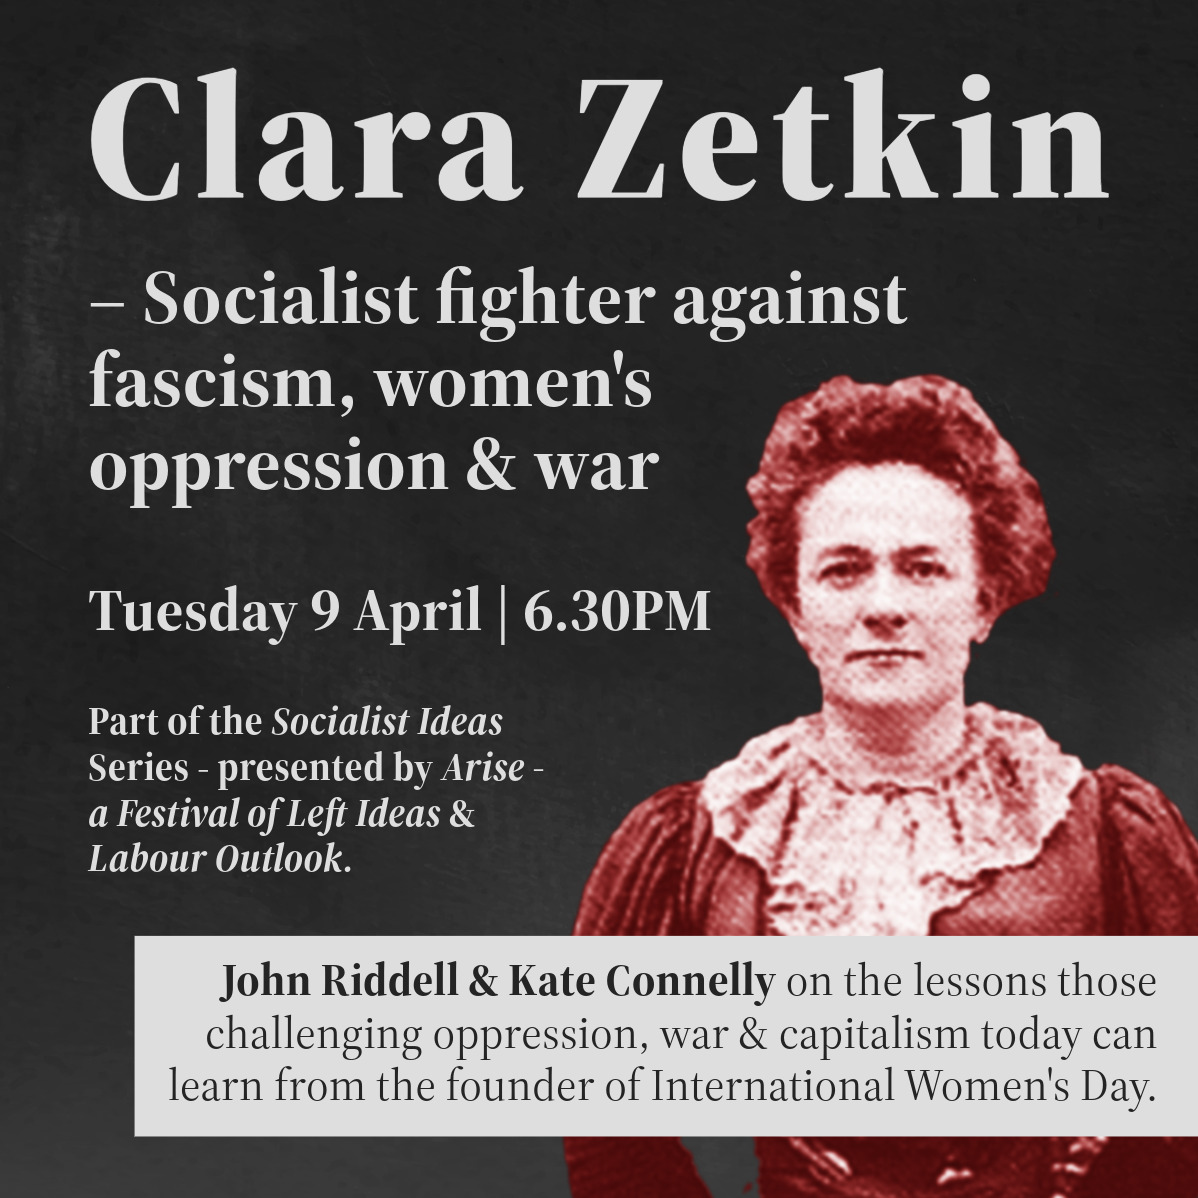 We're excited to be co-hosting this online forum with @LabourOutlook next Tuesday focusing on #IWD founder Clara Zetkin- featuring authors/historians @JohnRiddell9 and @SuffragetteKate discussing her political life and legacy. Find out more/register here: eventbrite.co.uk/e/clara-zetkin…